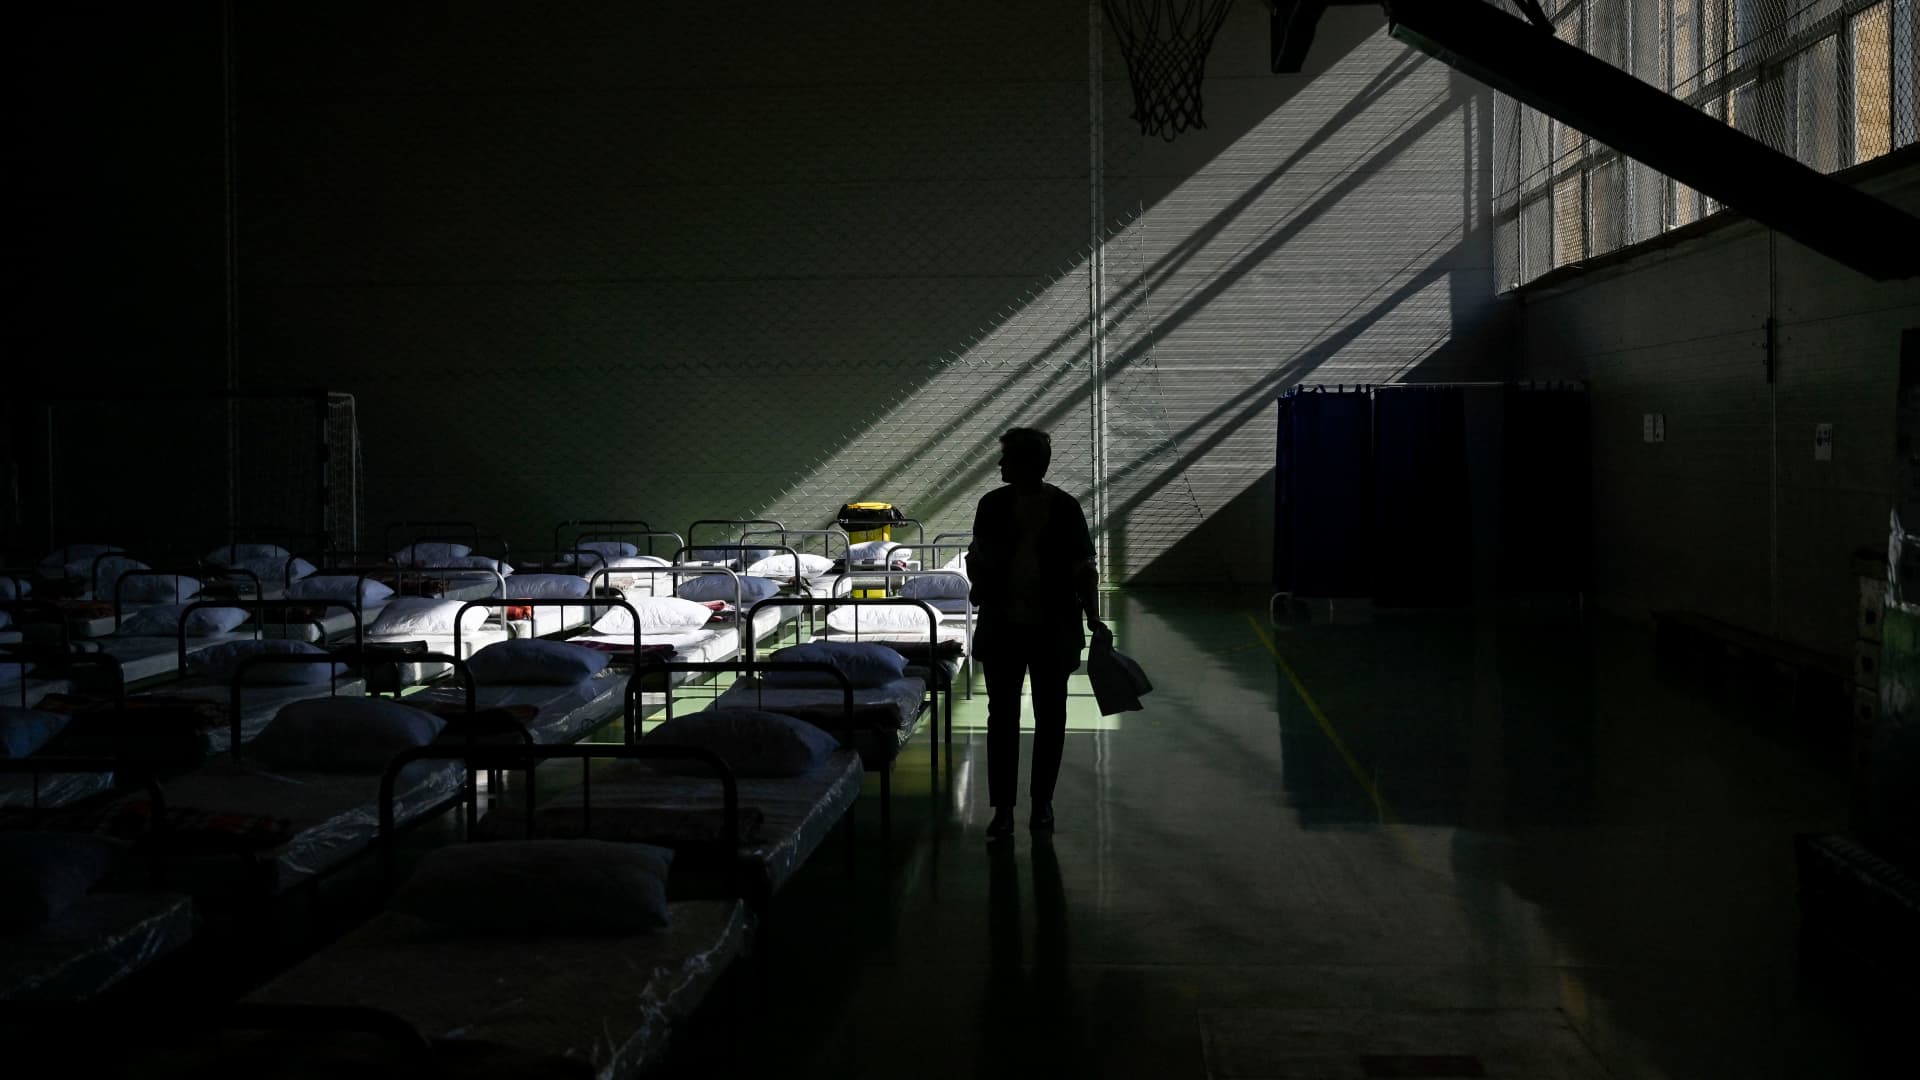 An Ukrainian evacuee walks past beds that have been prepared in a school gym which has been converted into a shelter for Ukrainian refugees in the town of Suceava, Romania on March 18, 2022.